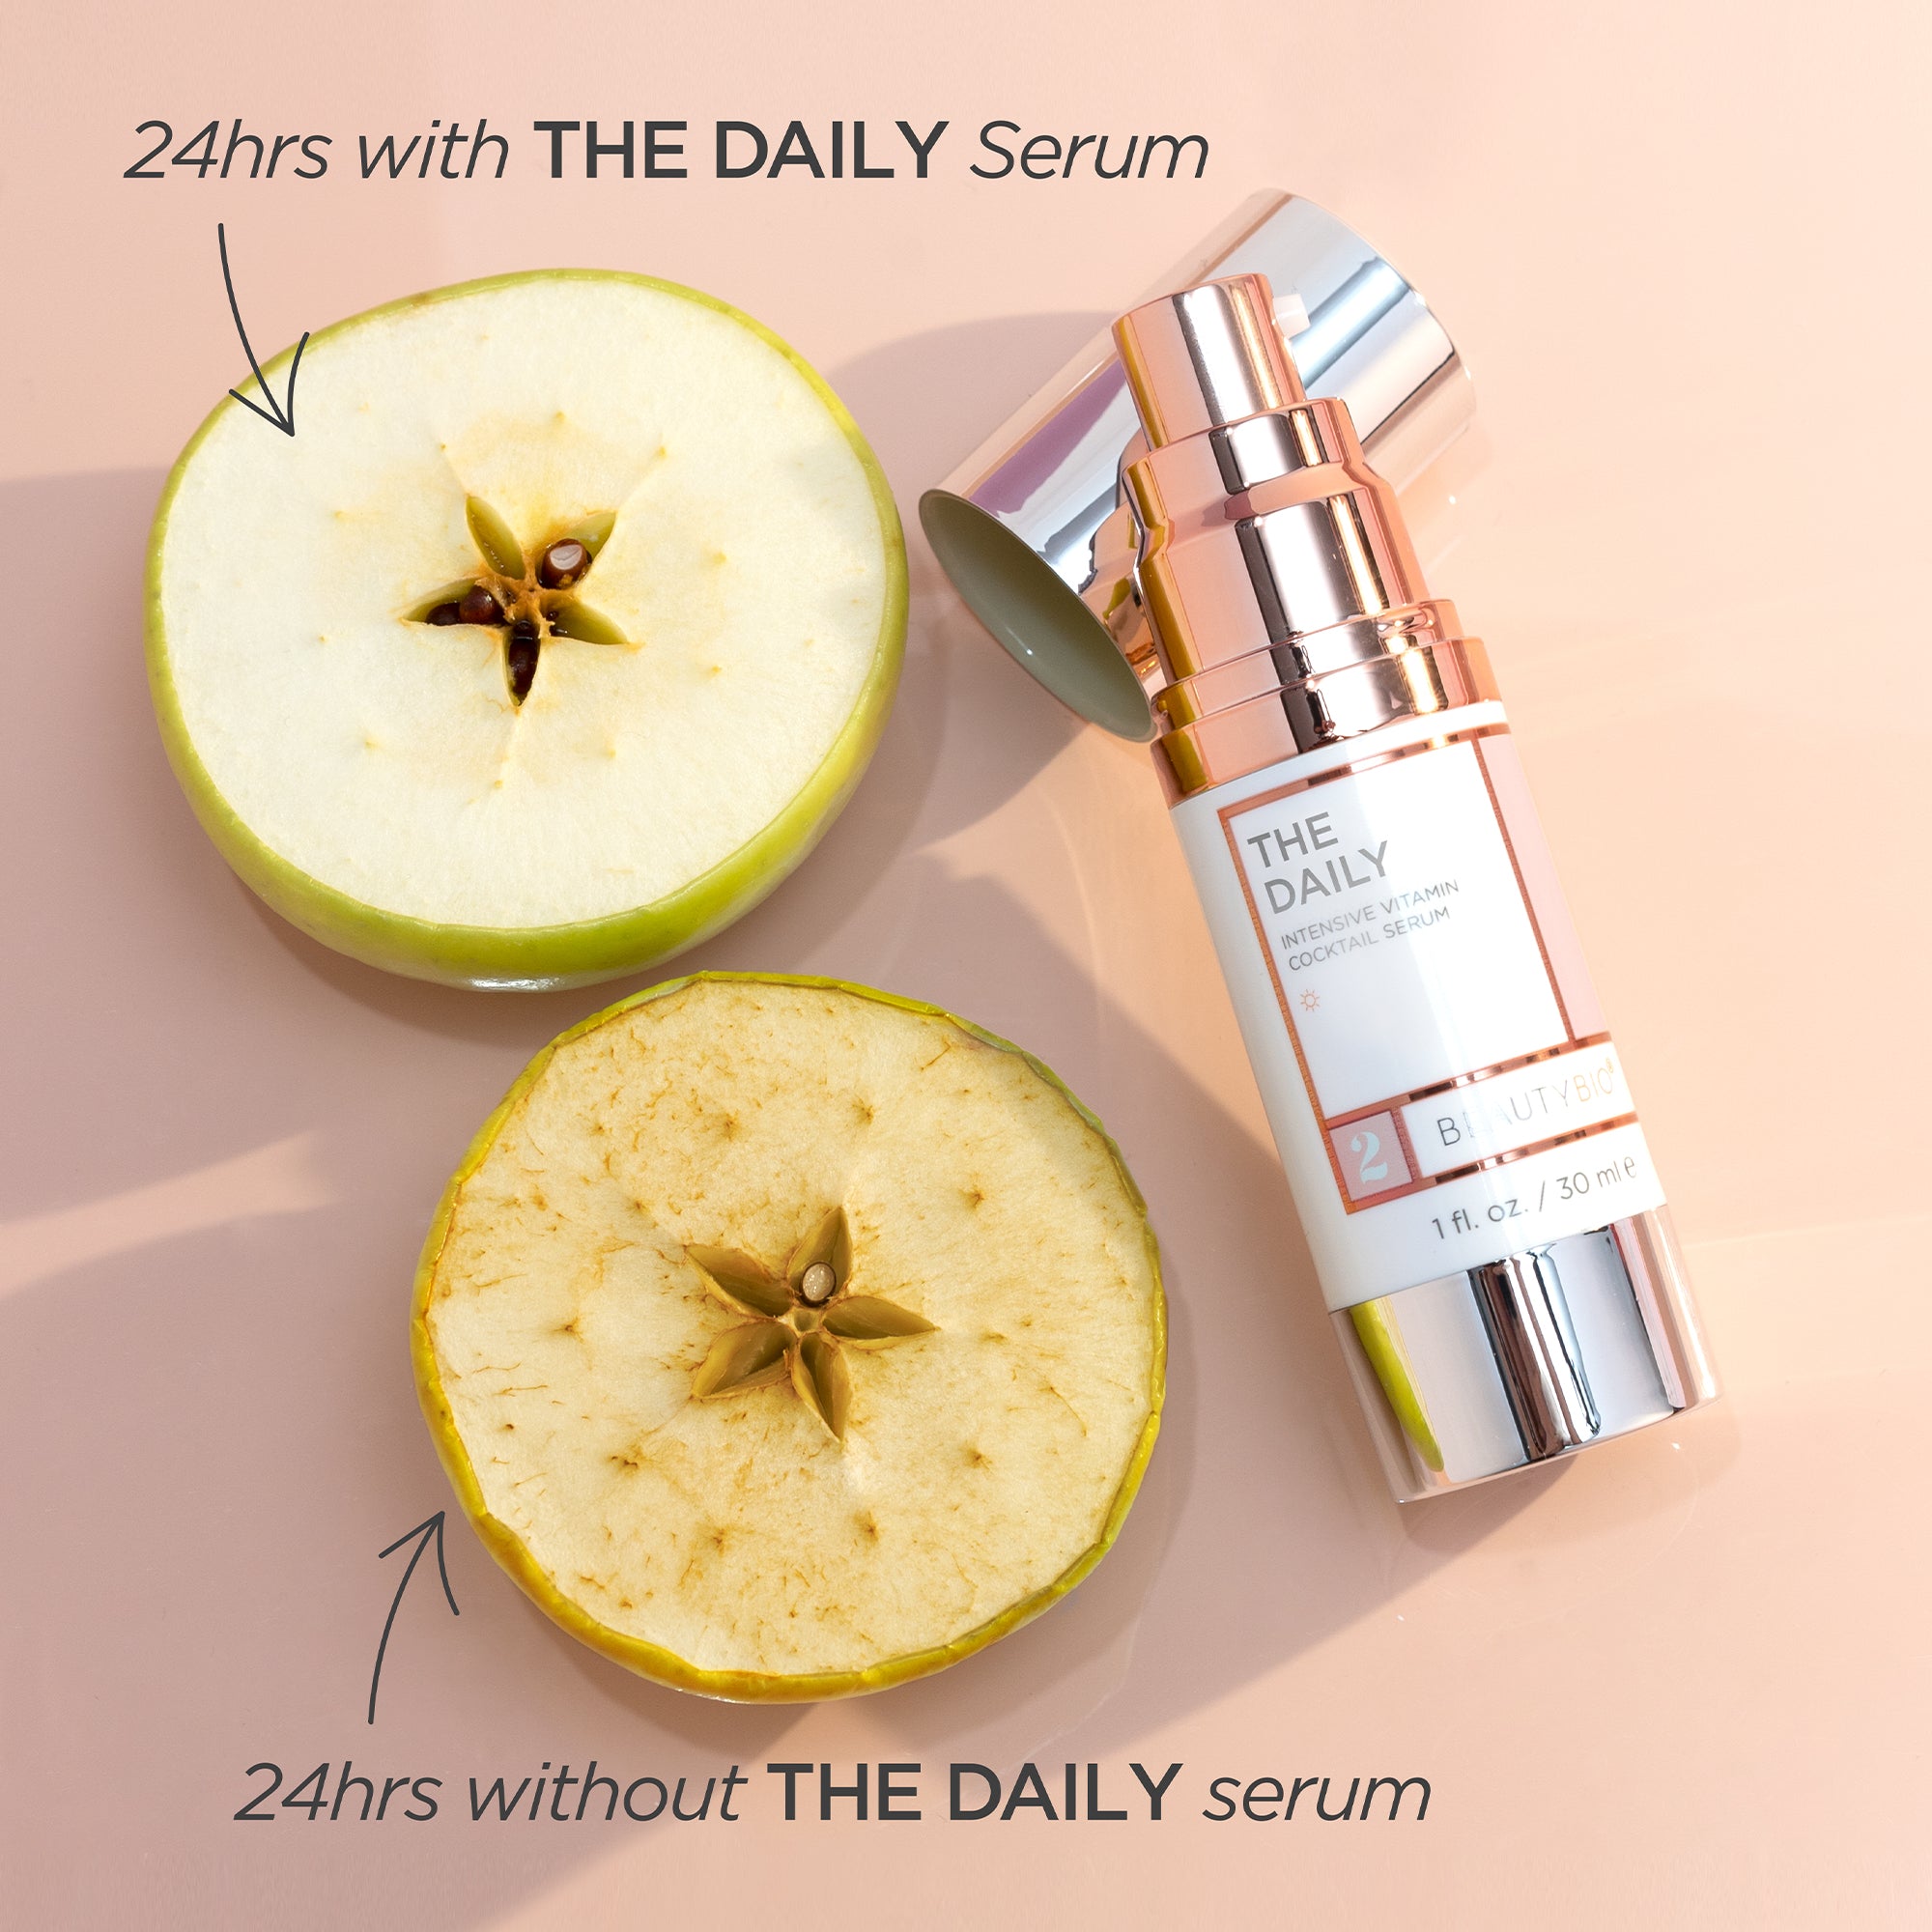 24hrs with and without the daily serum